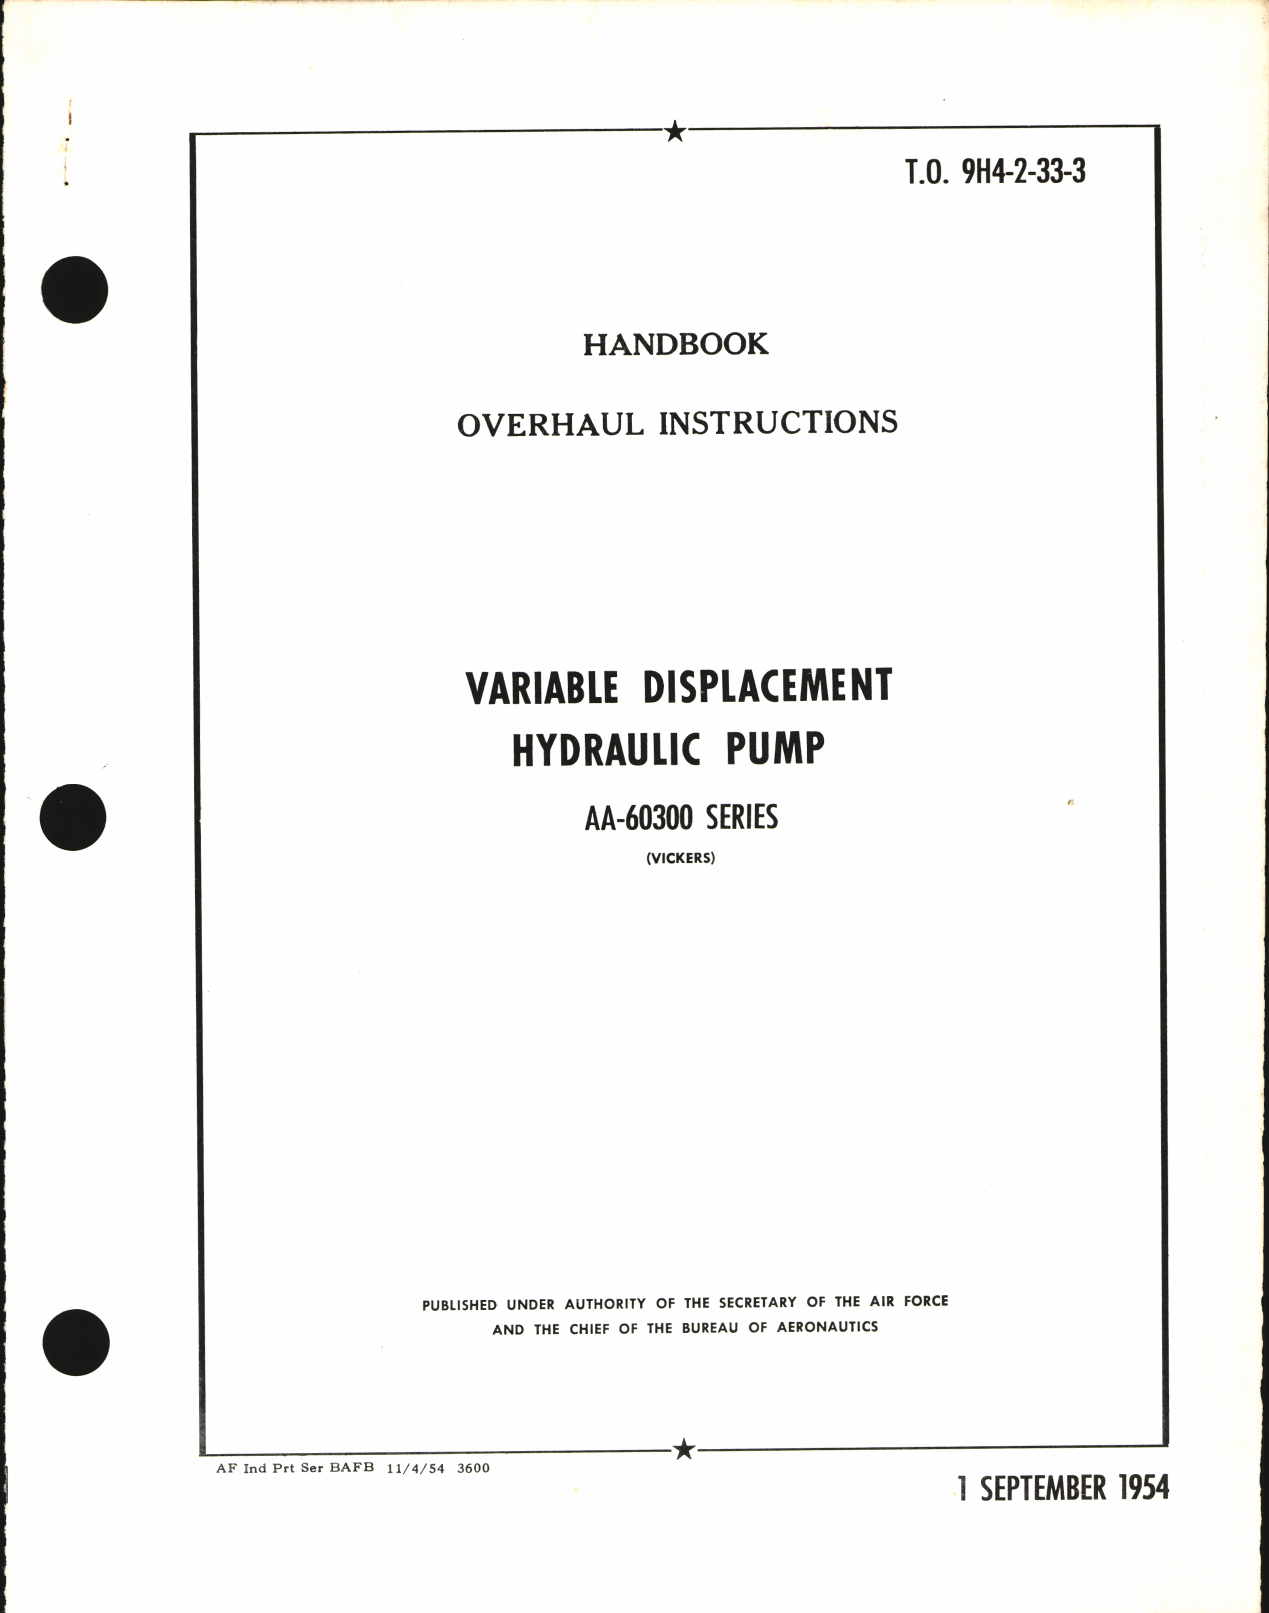 Sample page 1 from AirCorps Library document: Overhaul Instructions for Variable Displacement Hydraulic Pump AA-60300 Series